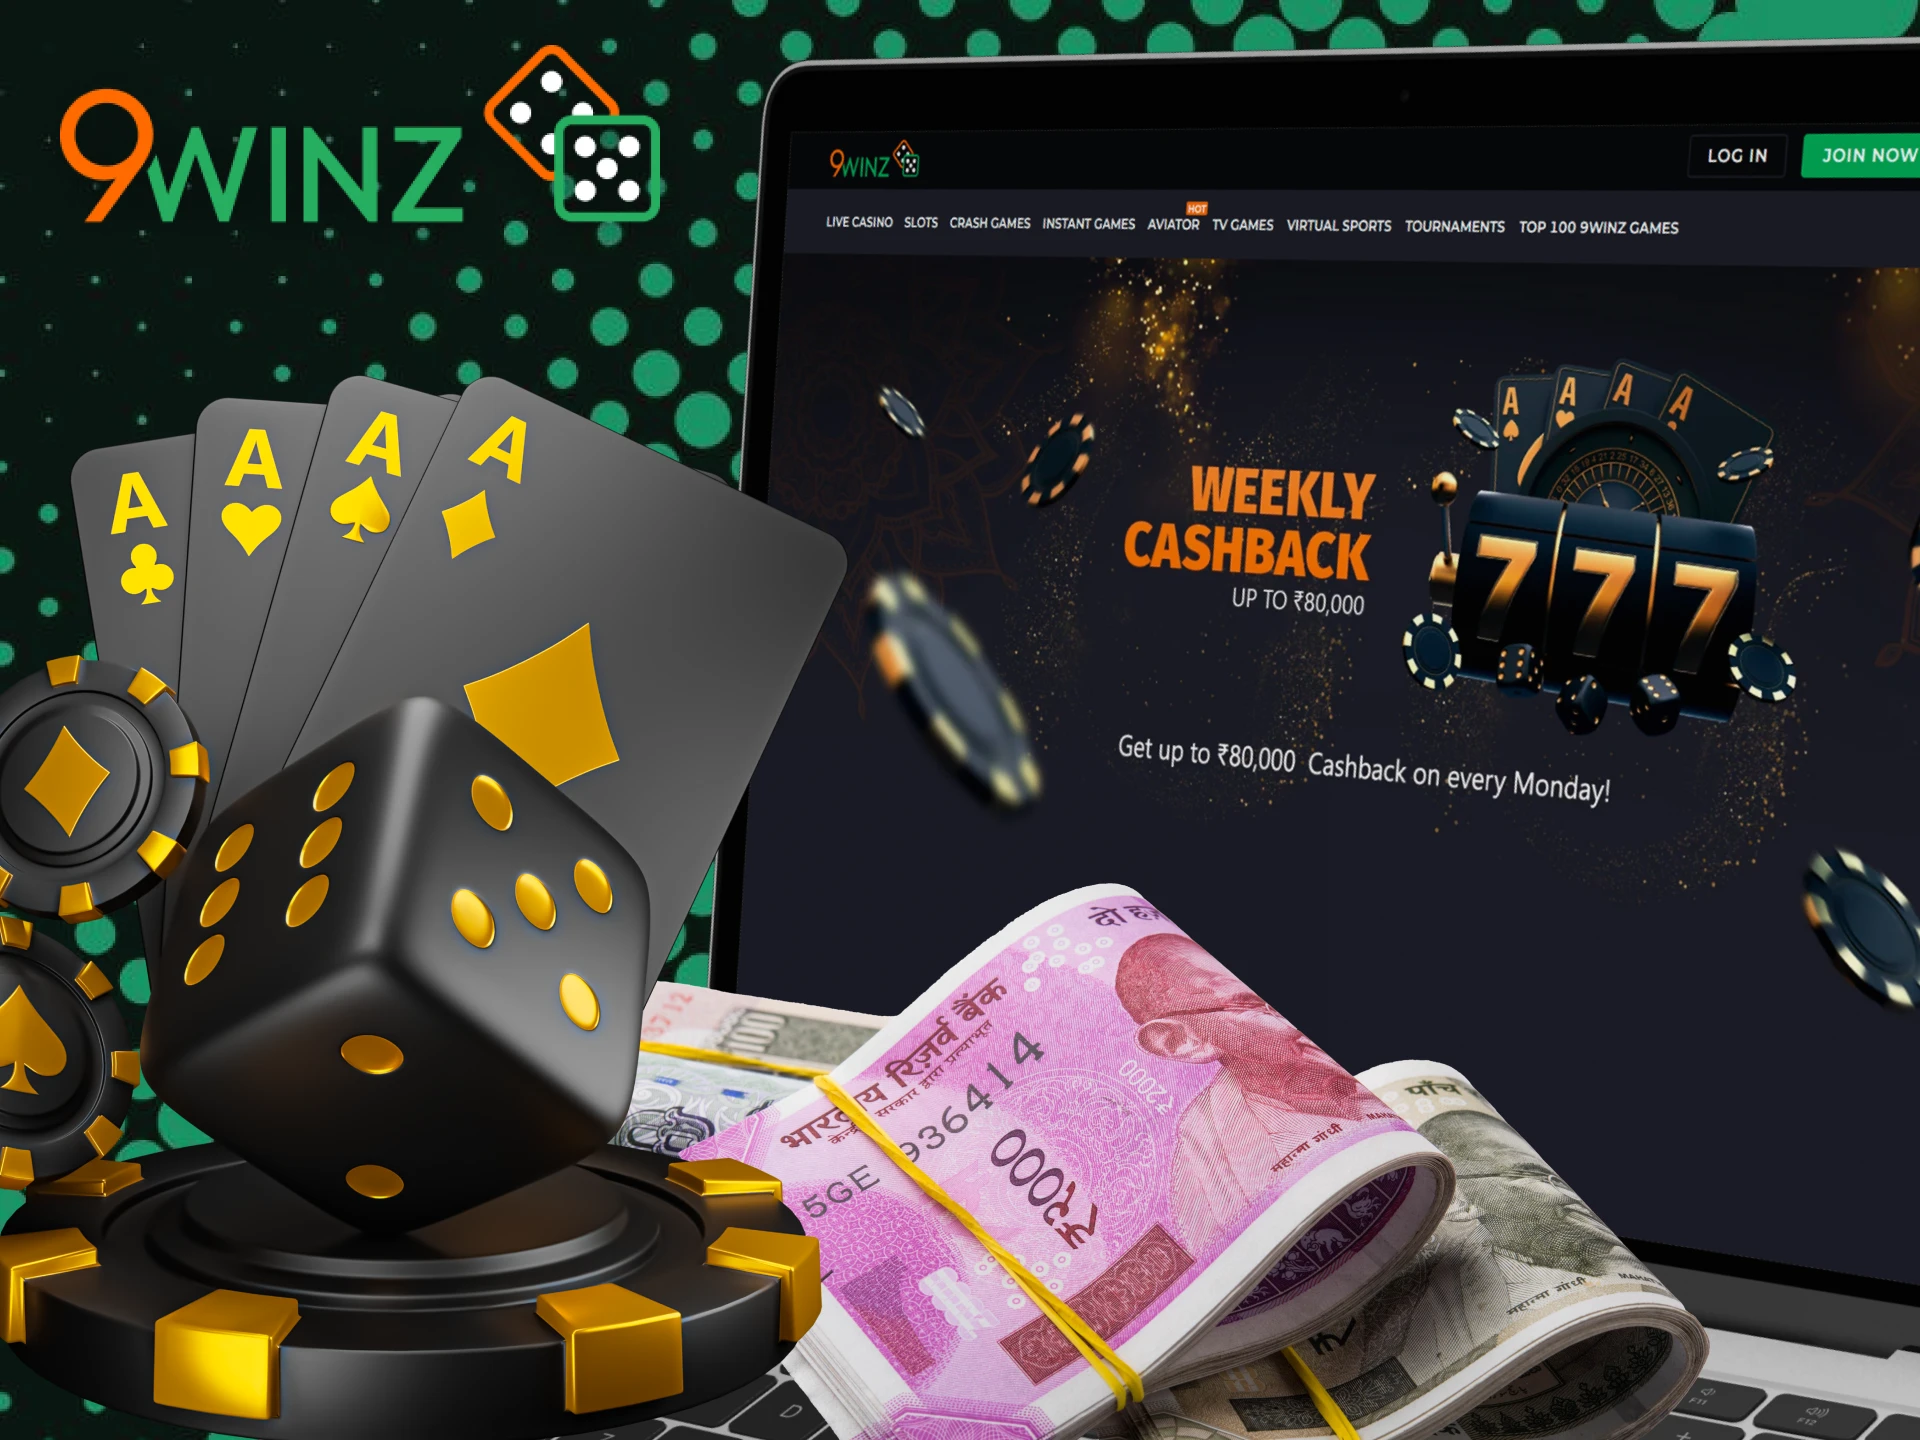 At 9Winz Casino, get cashback on all your losses.